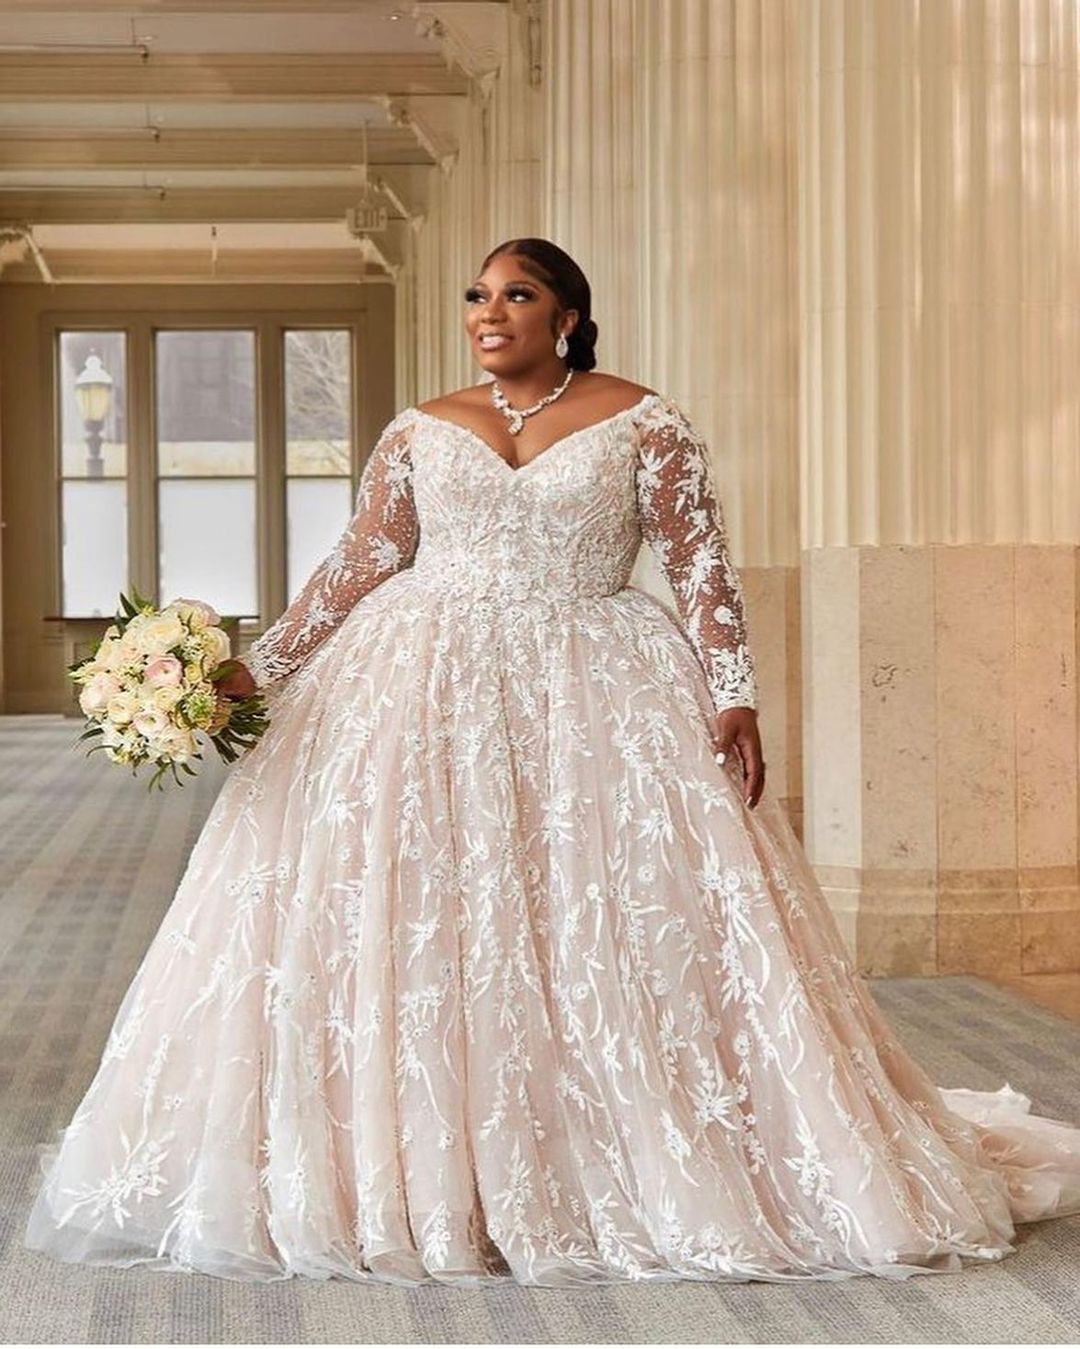 going to decide bilayer among Plus Size Wedding Dresses Luxury Ebi Aso Long Sleeve Luxury Full Lace  Applique African Arabic Princess